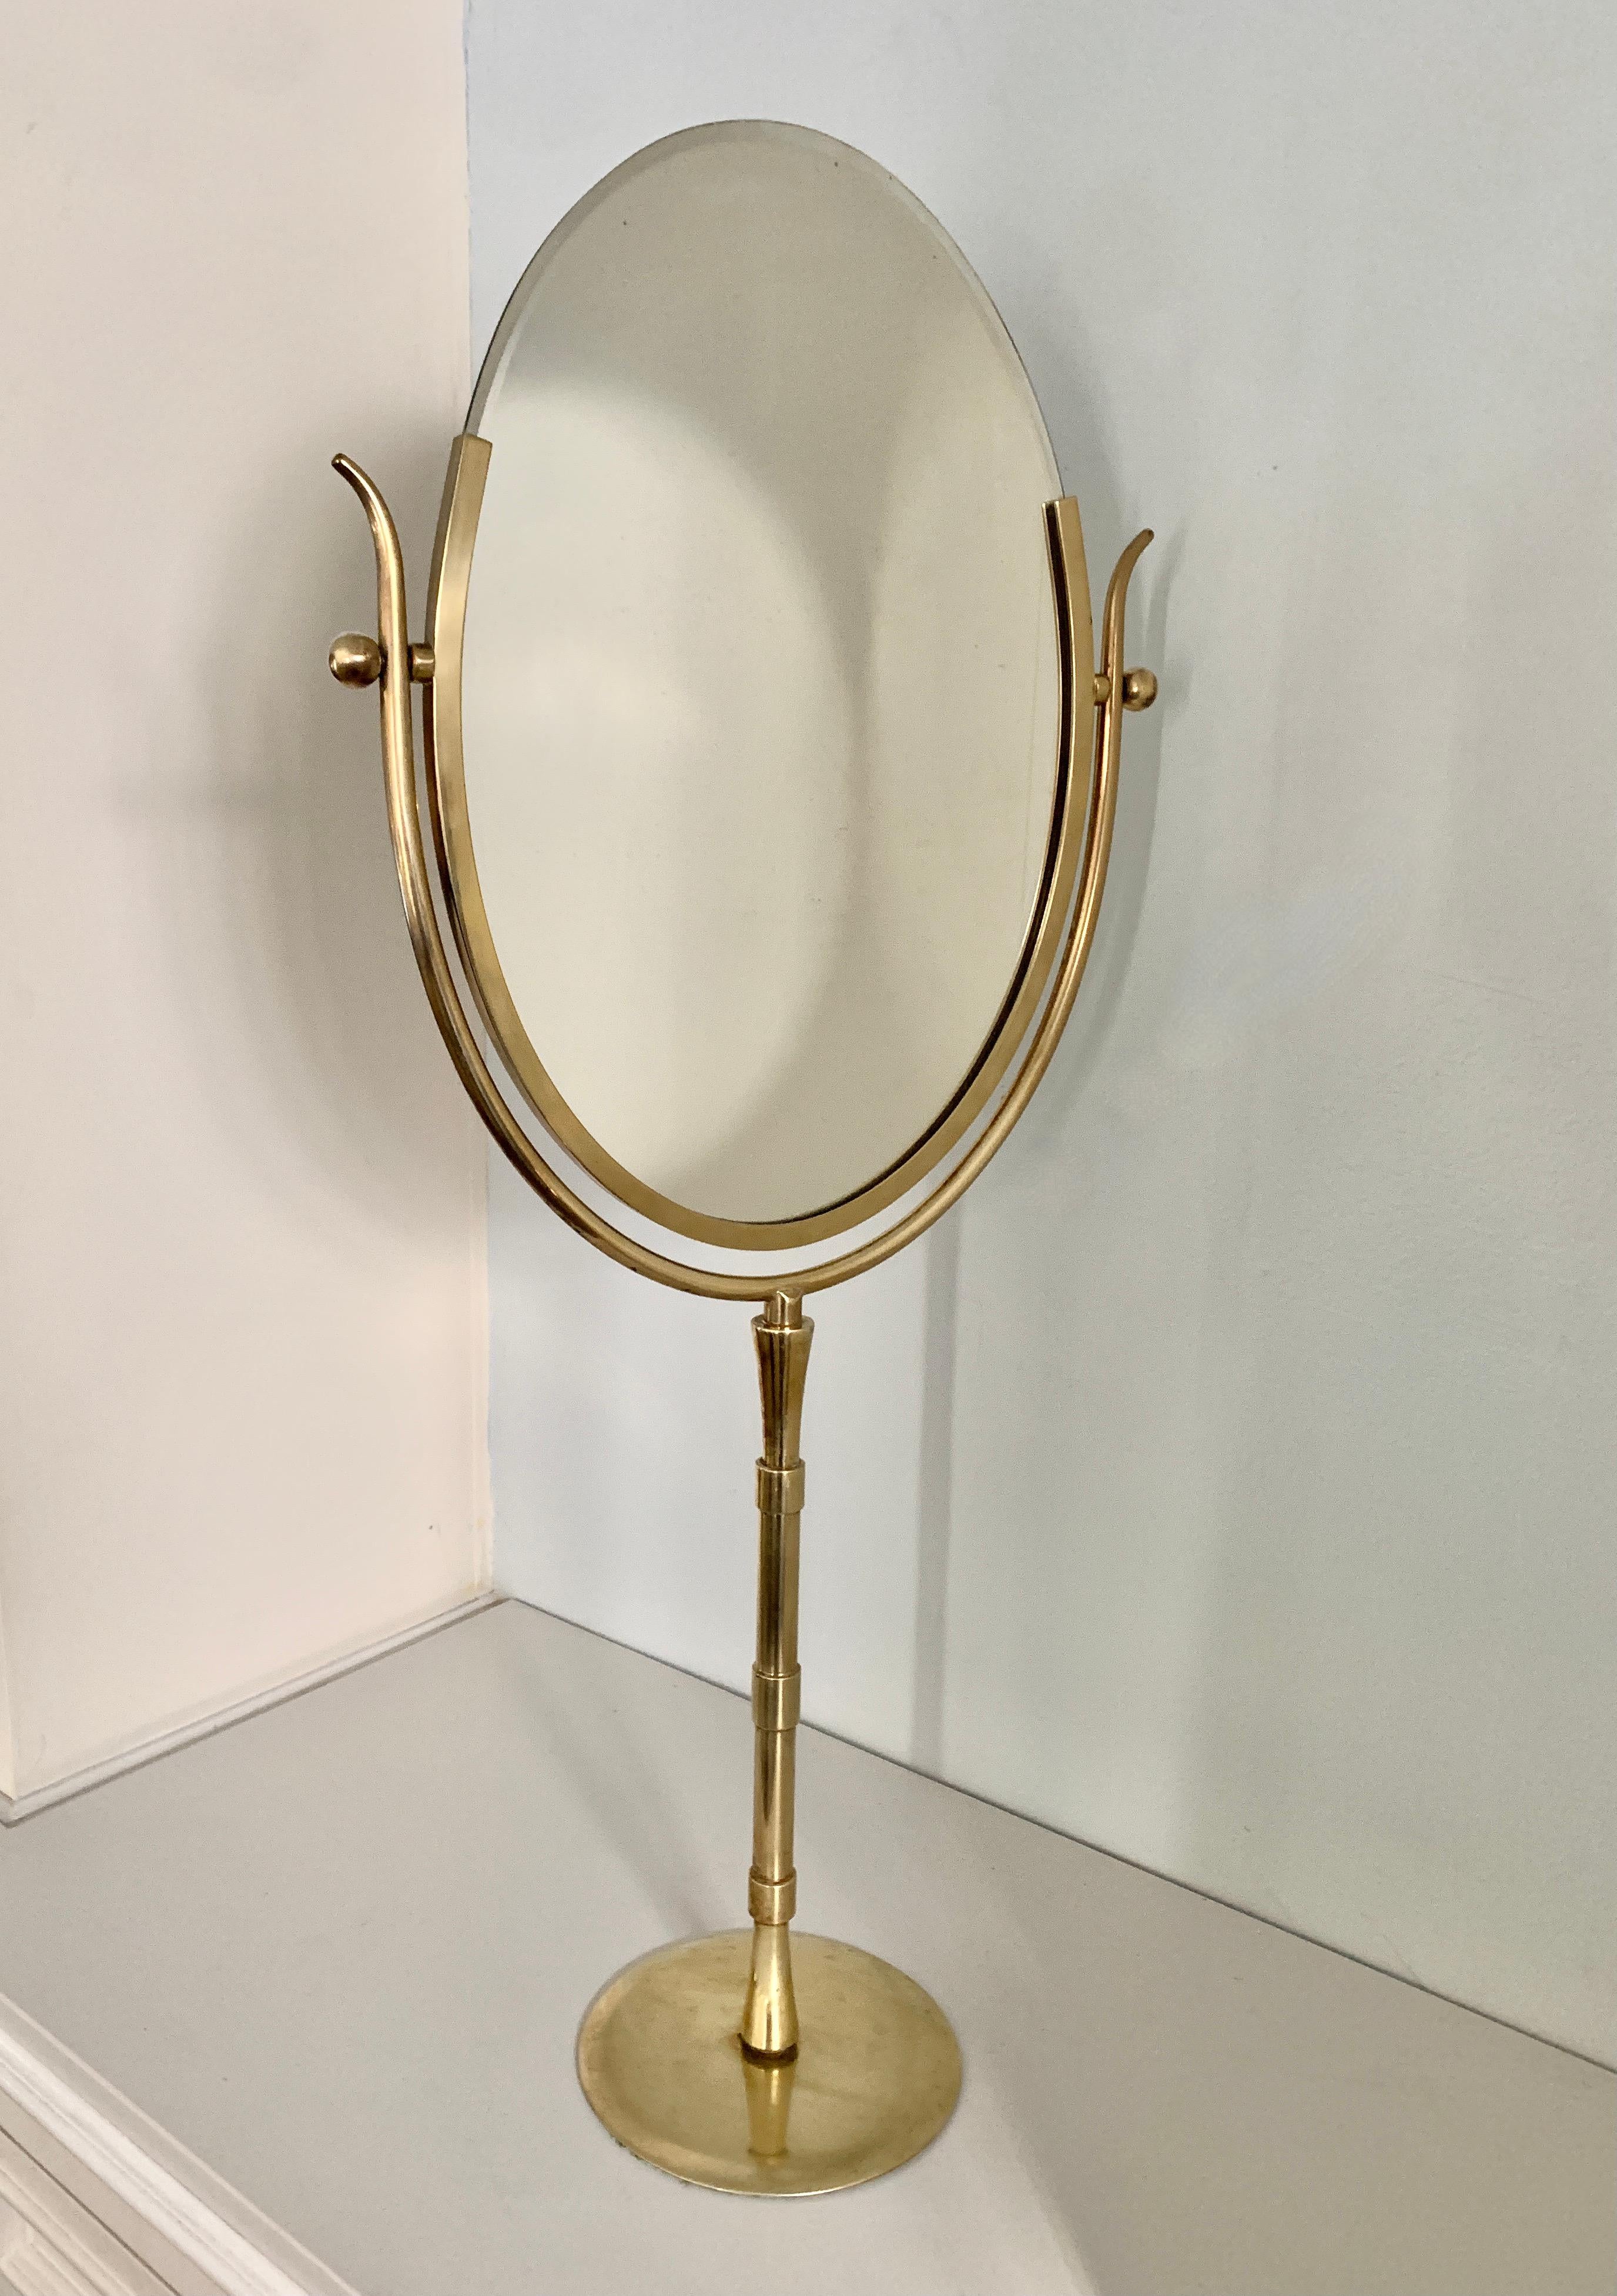 This is a rare and spectacular Vanity mirror by Charles Hollis Jones. We have a relationship with Charles and during a recent phone call he confirmed that this mirror is a rare example of his Wishbone mirror, he named the 